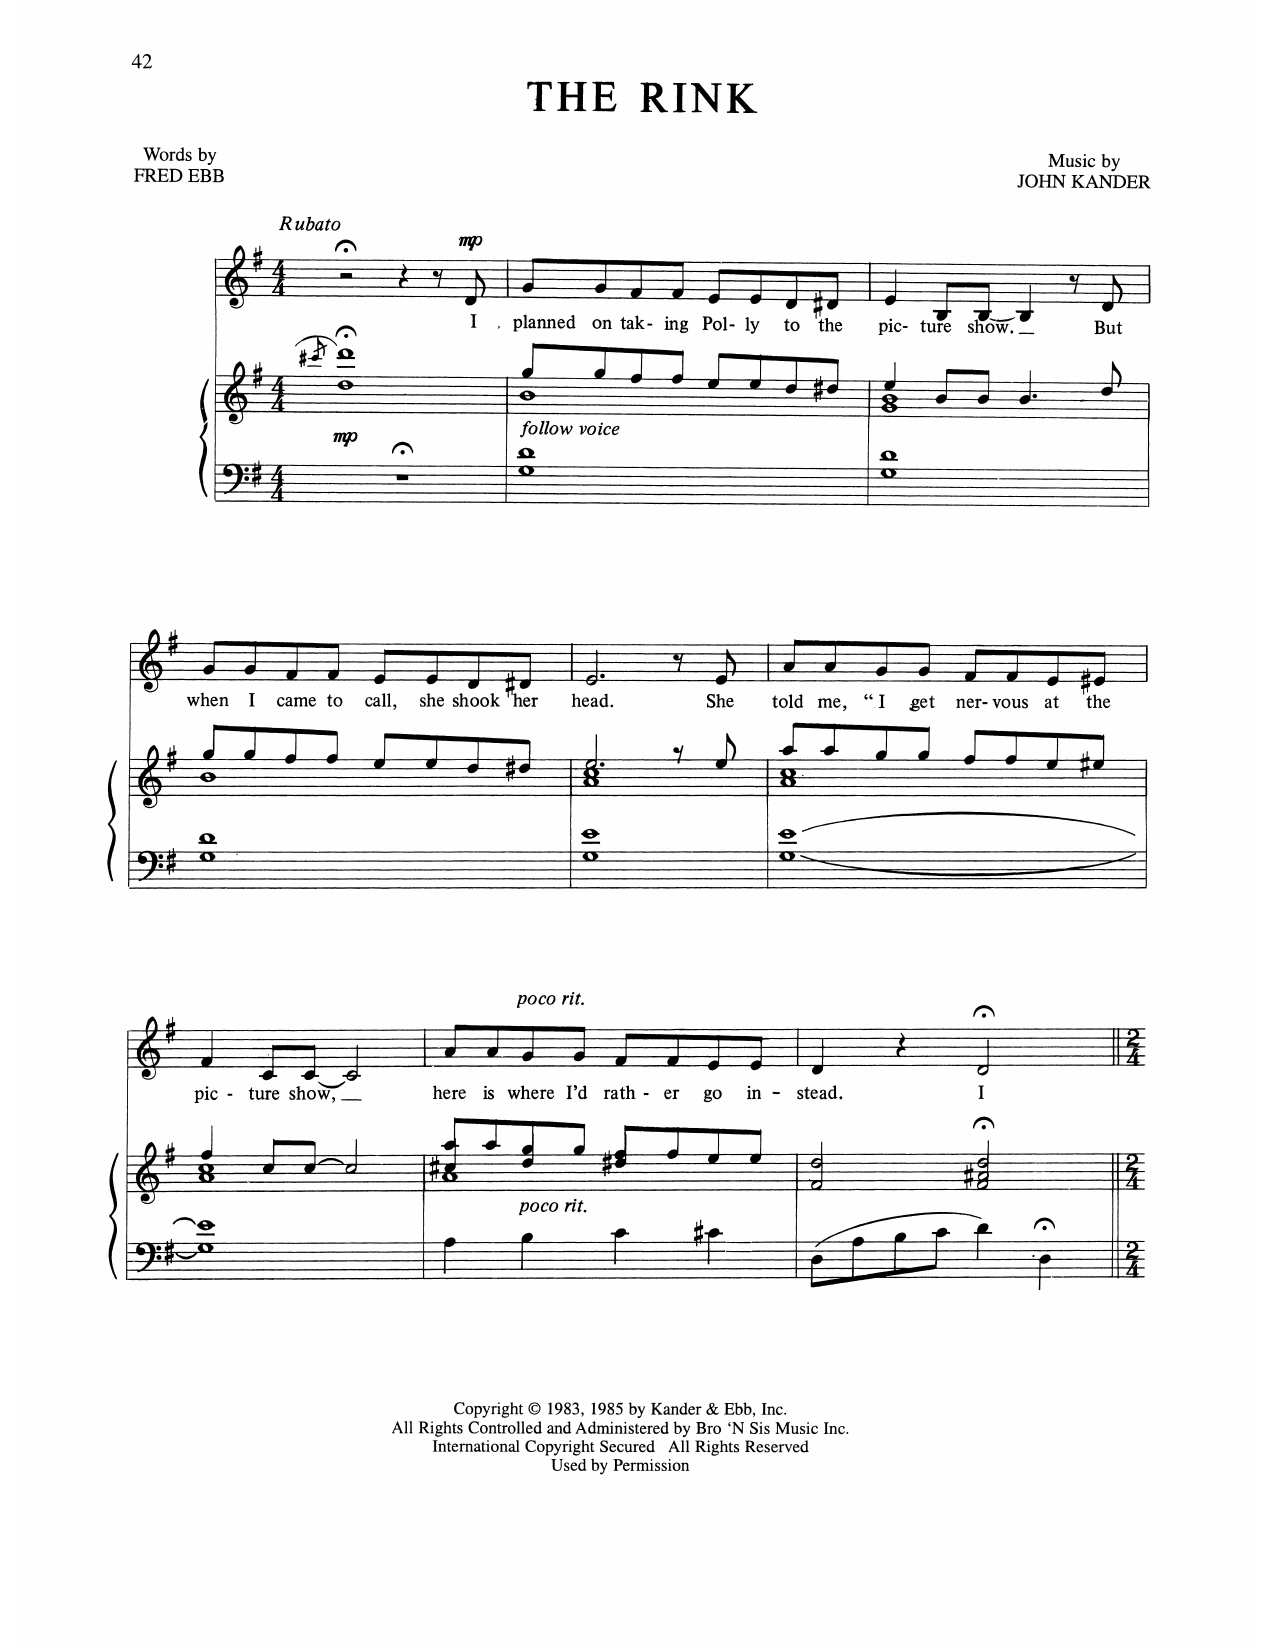 Download Kander & Ebb The Rink (from The Rink) Sheet Music